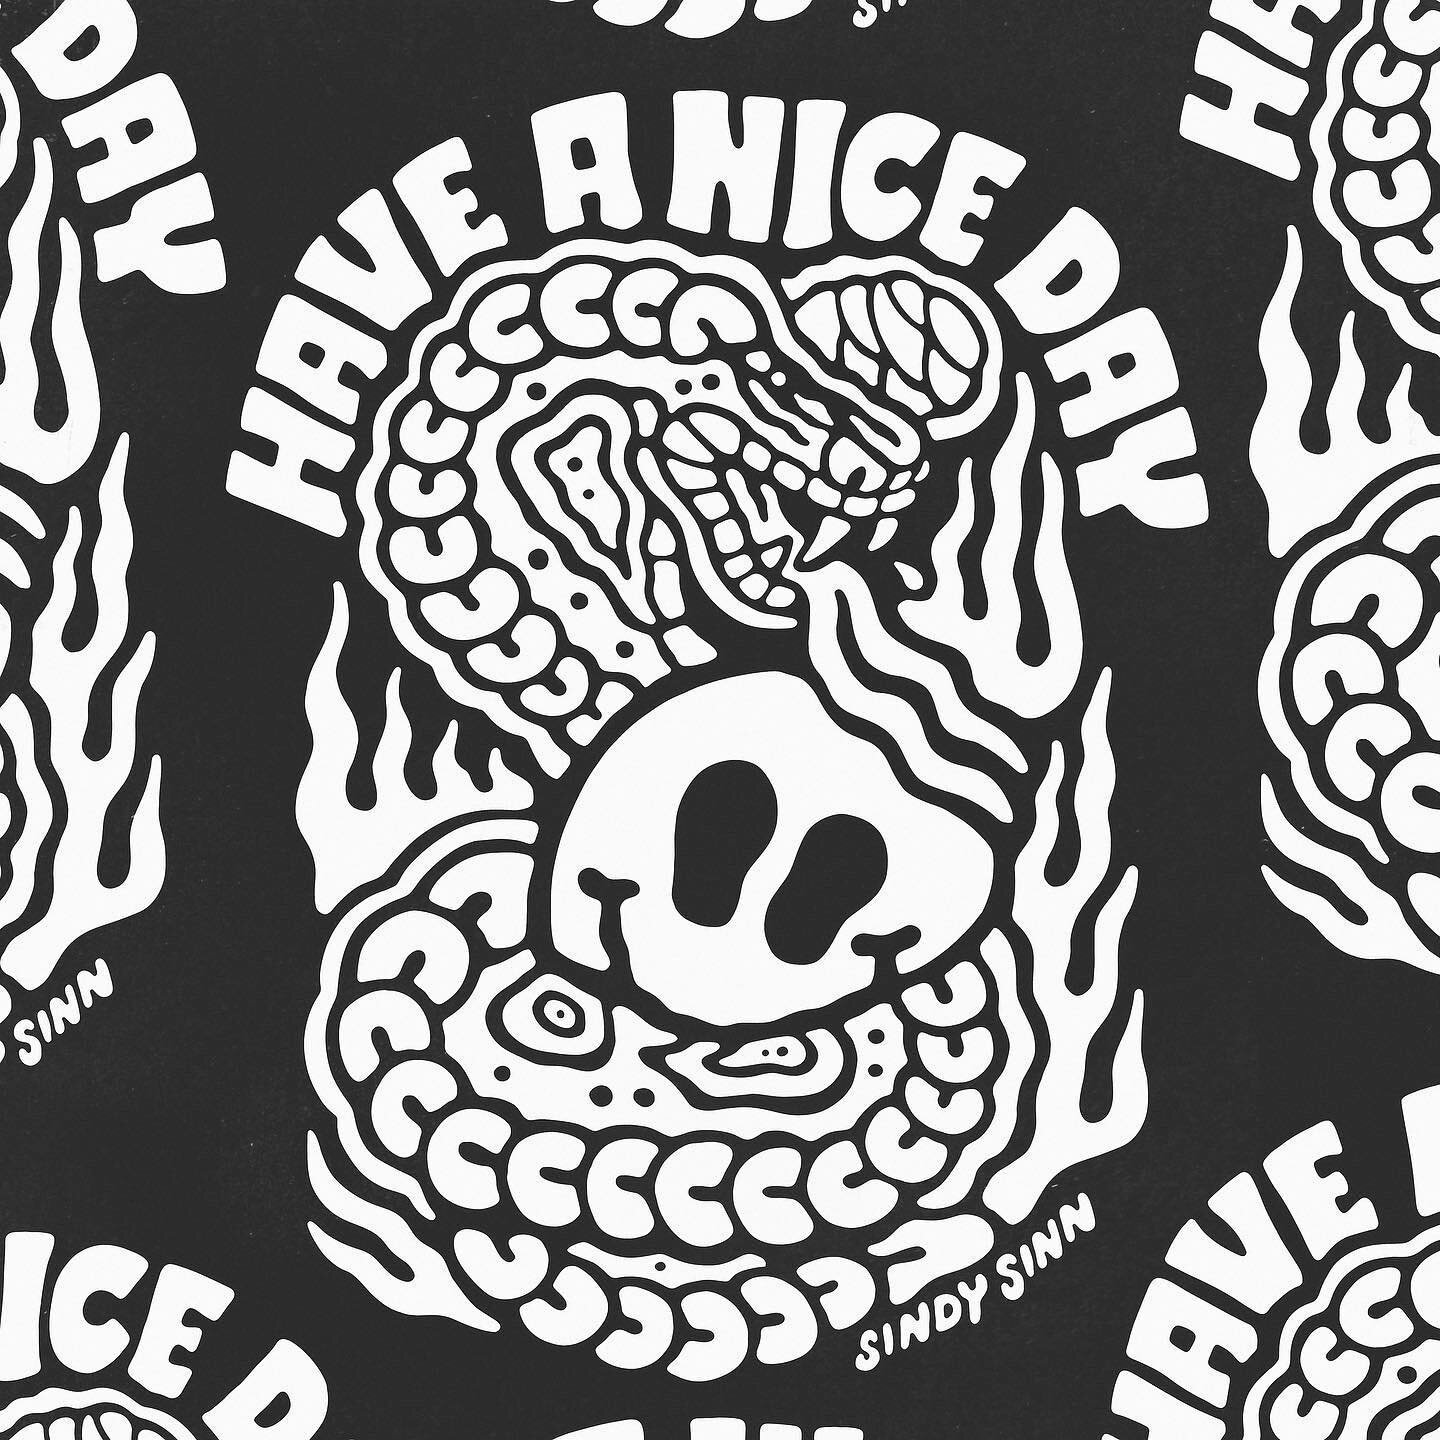 The HAVE A NICE DAY design, one of three new shirts available in the store on limited presale. Perfect for anyone who&rsquo;s tired of putting it on while they squeeze ya down.
Available til Thursday night then never again, so get ya order in and I&r